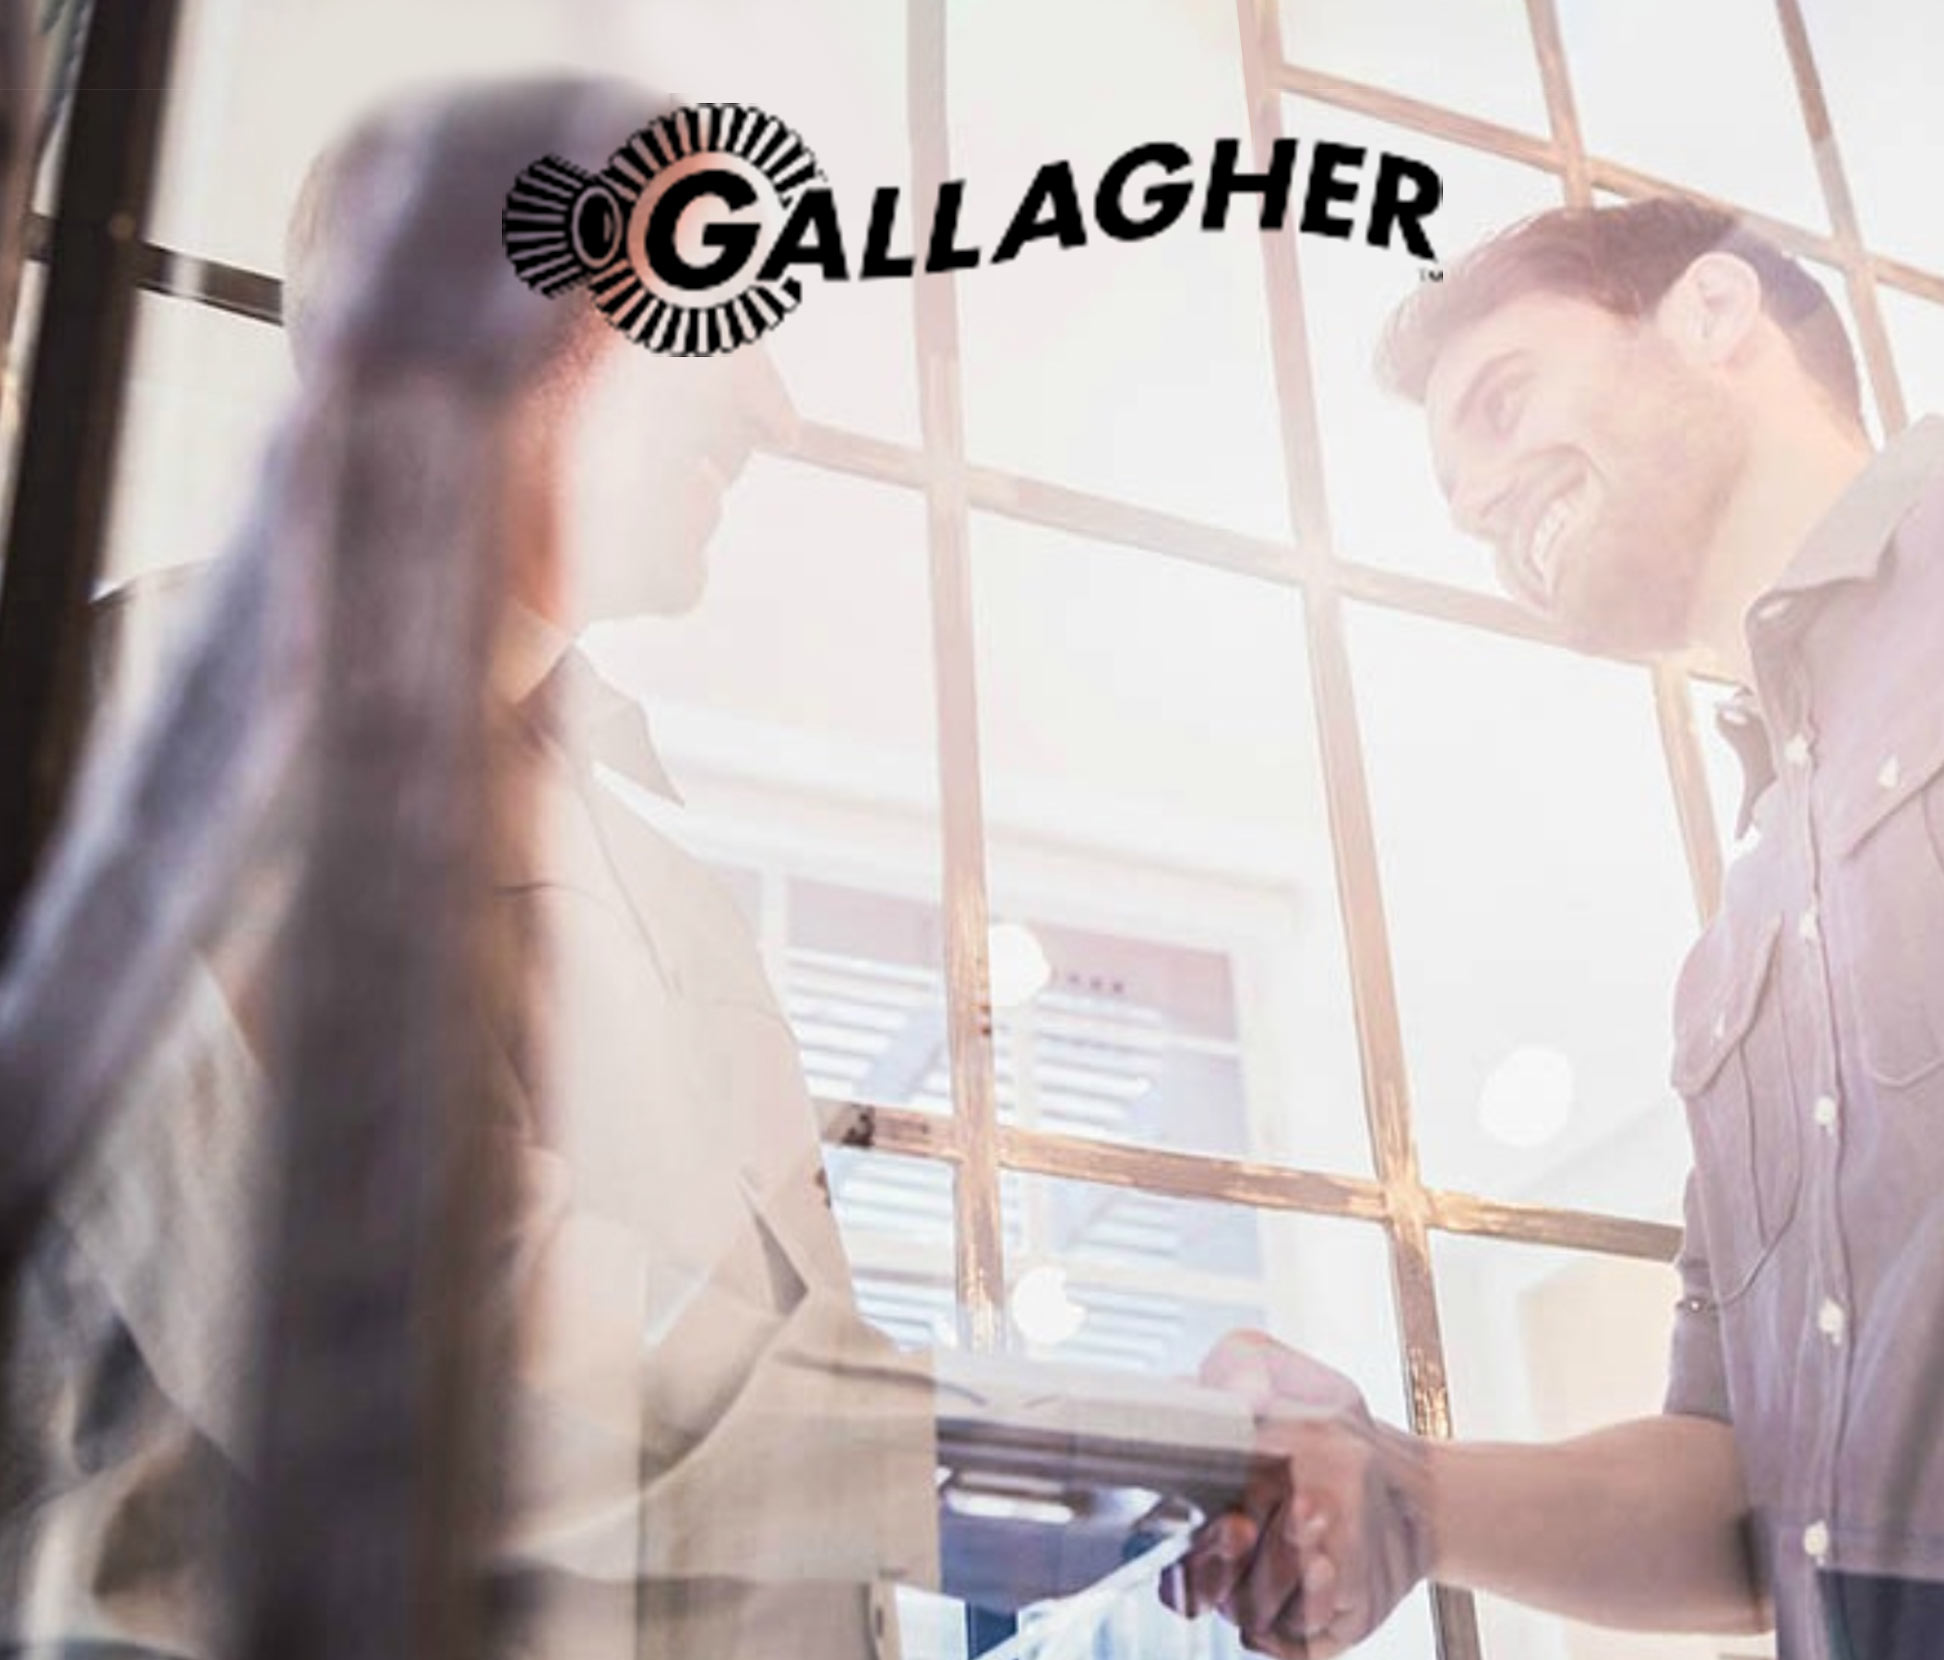 man and women talking with gallagher logo above